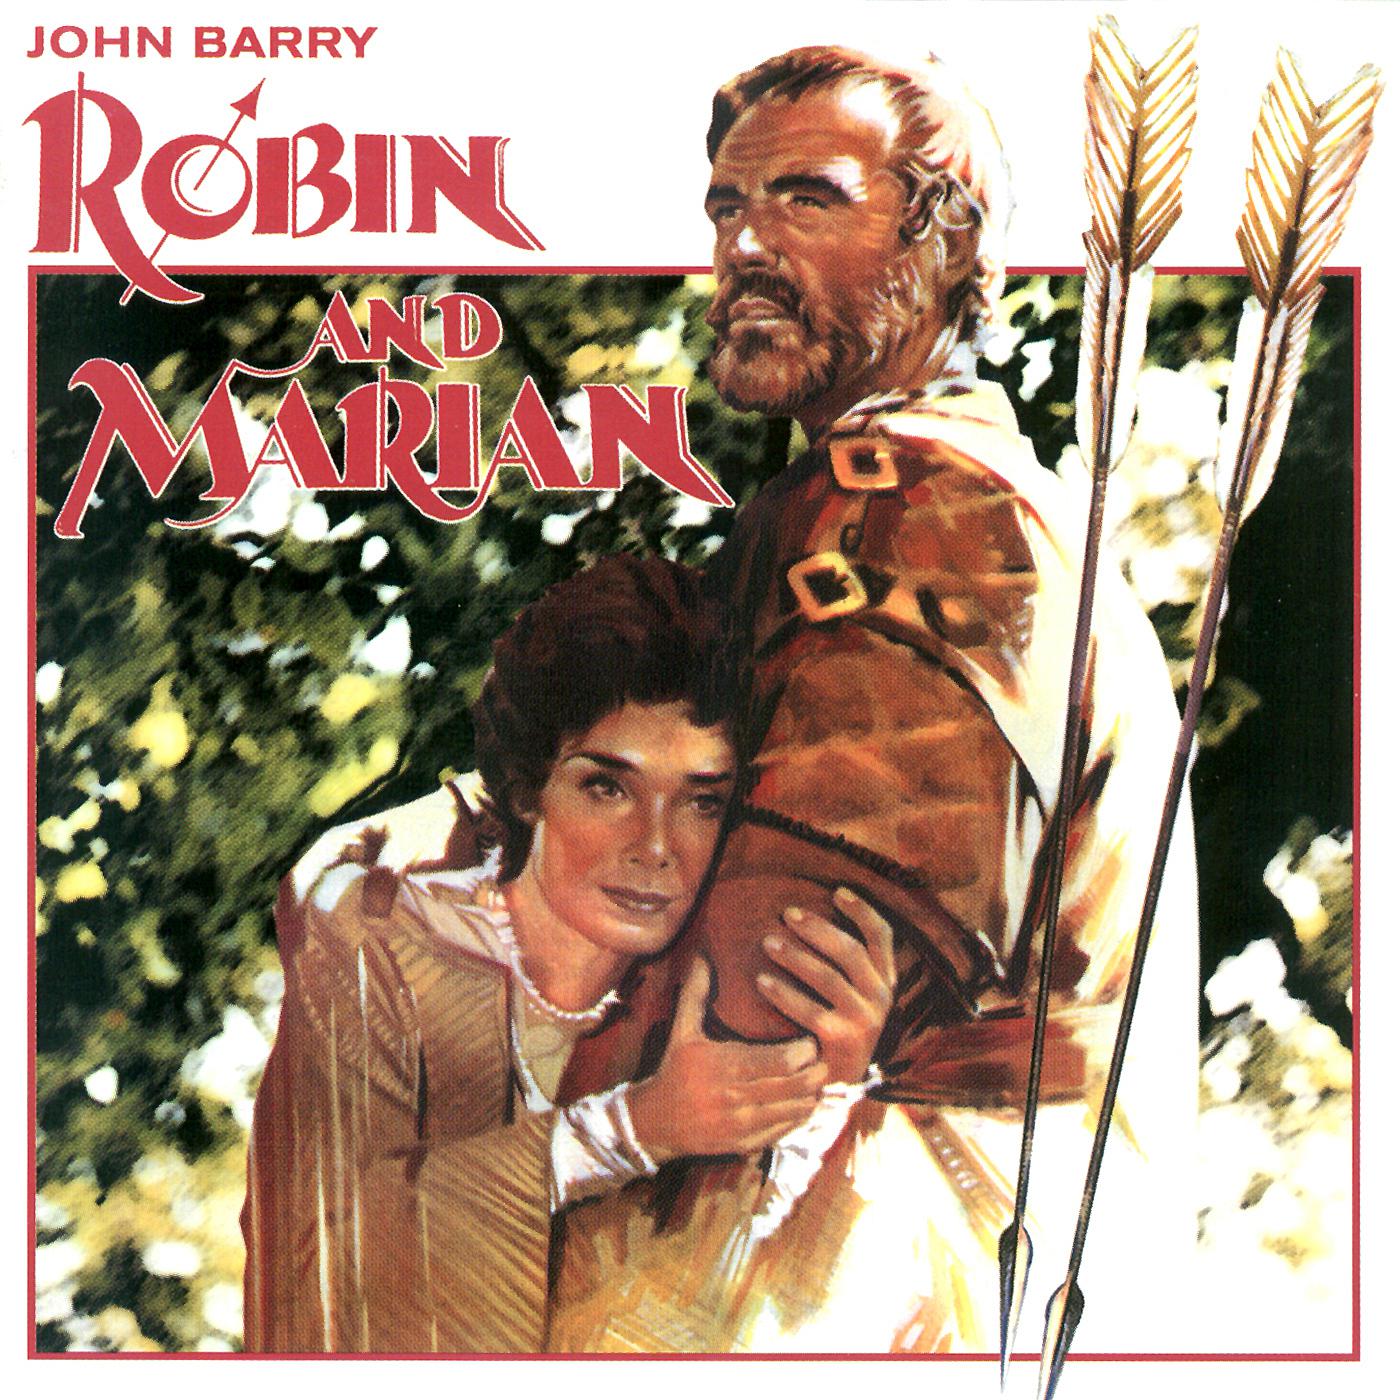 Over the Wall / Escape (From "Robin and Marian")